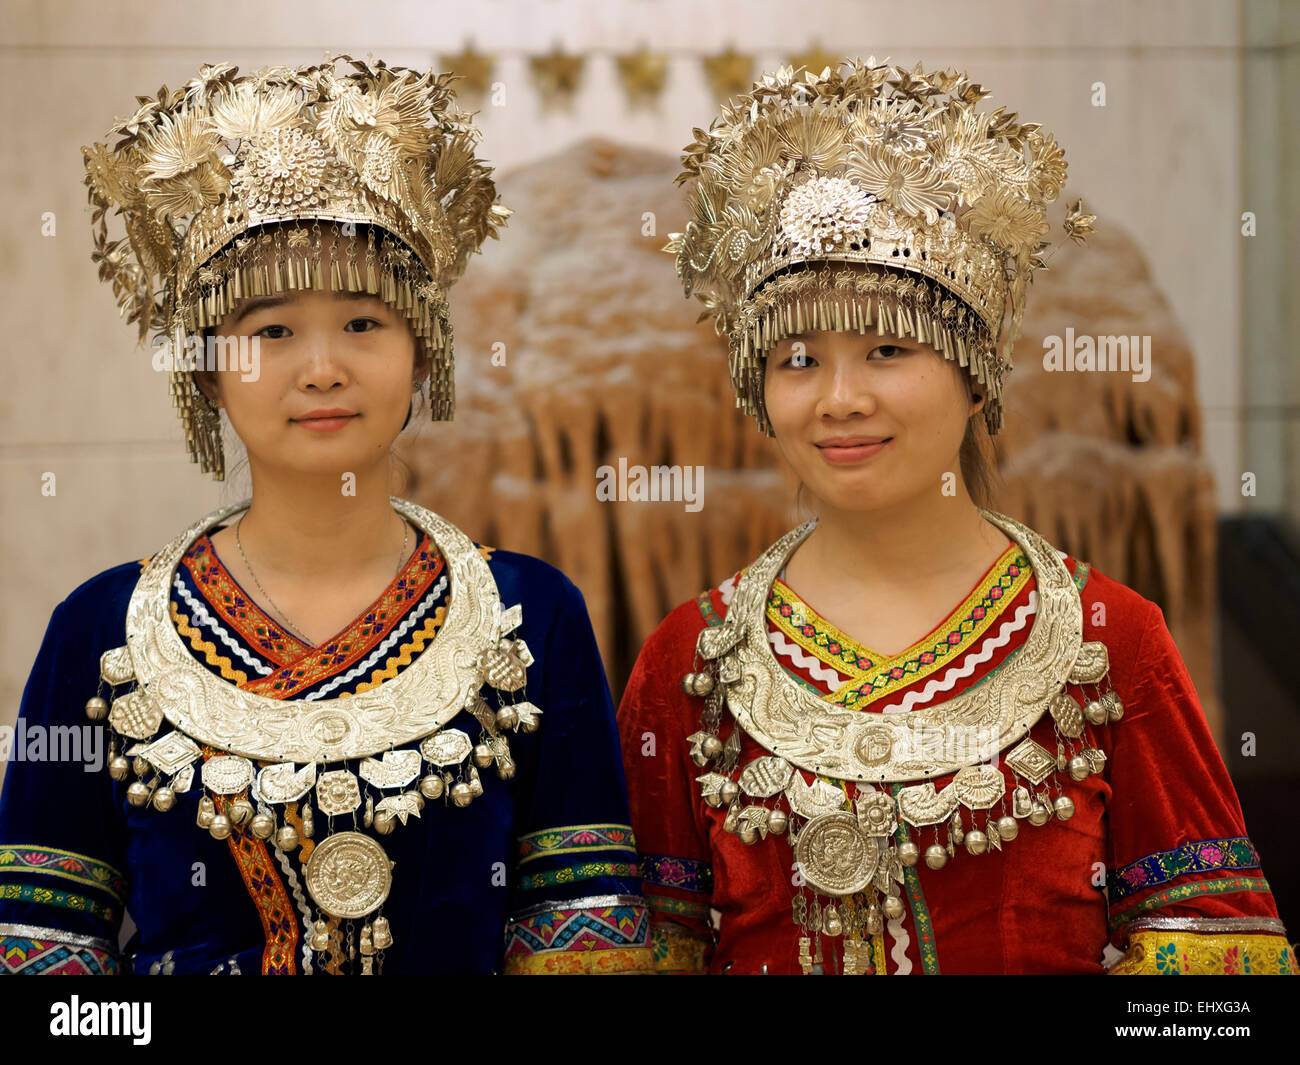 Portrait of two young women wearing traditional Miao ethnic minority clothing outfits in Guilin, China Stock Photo